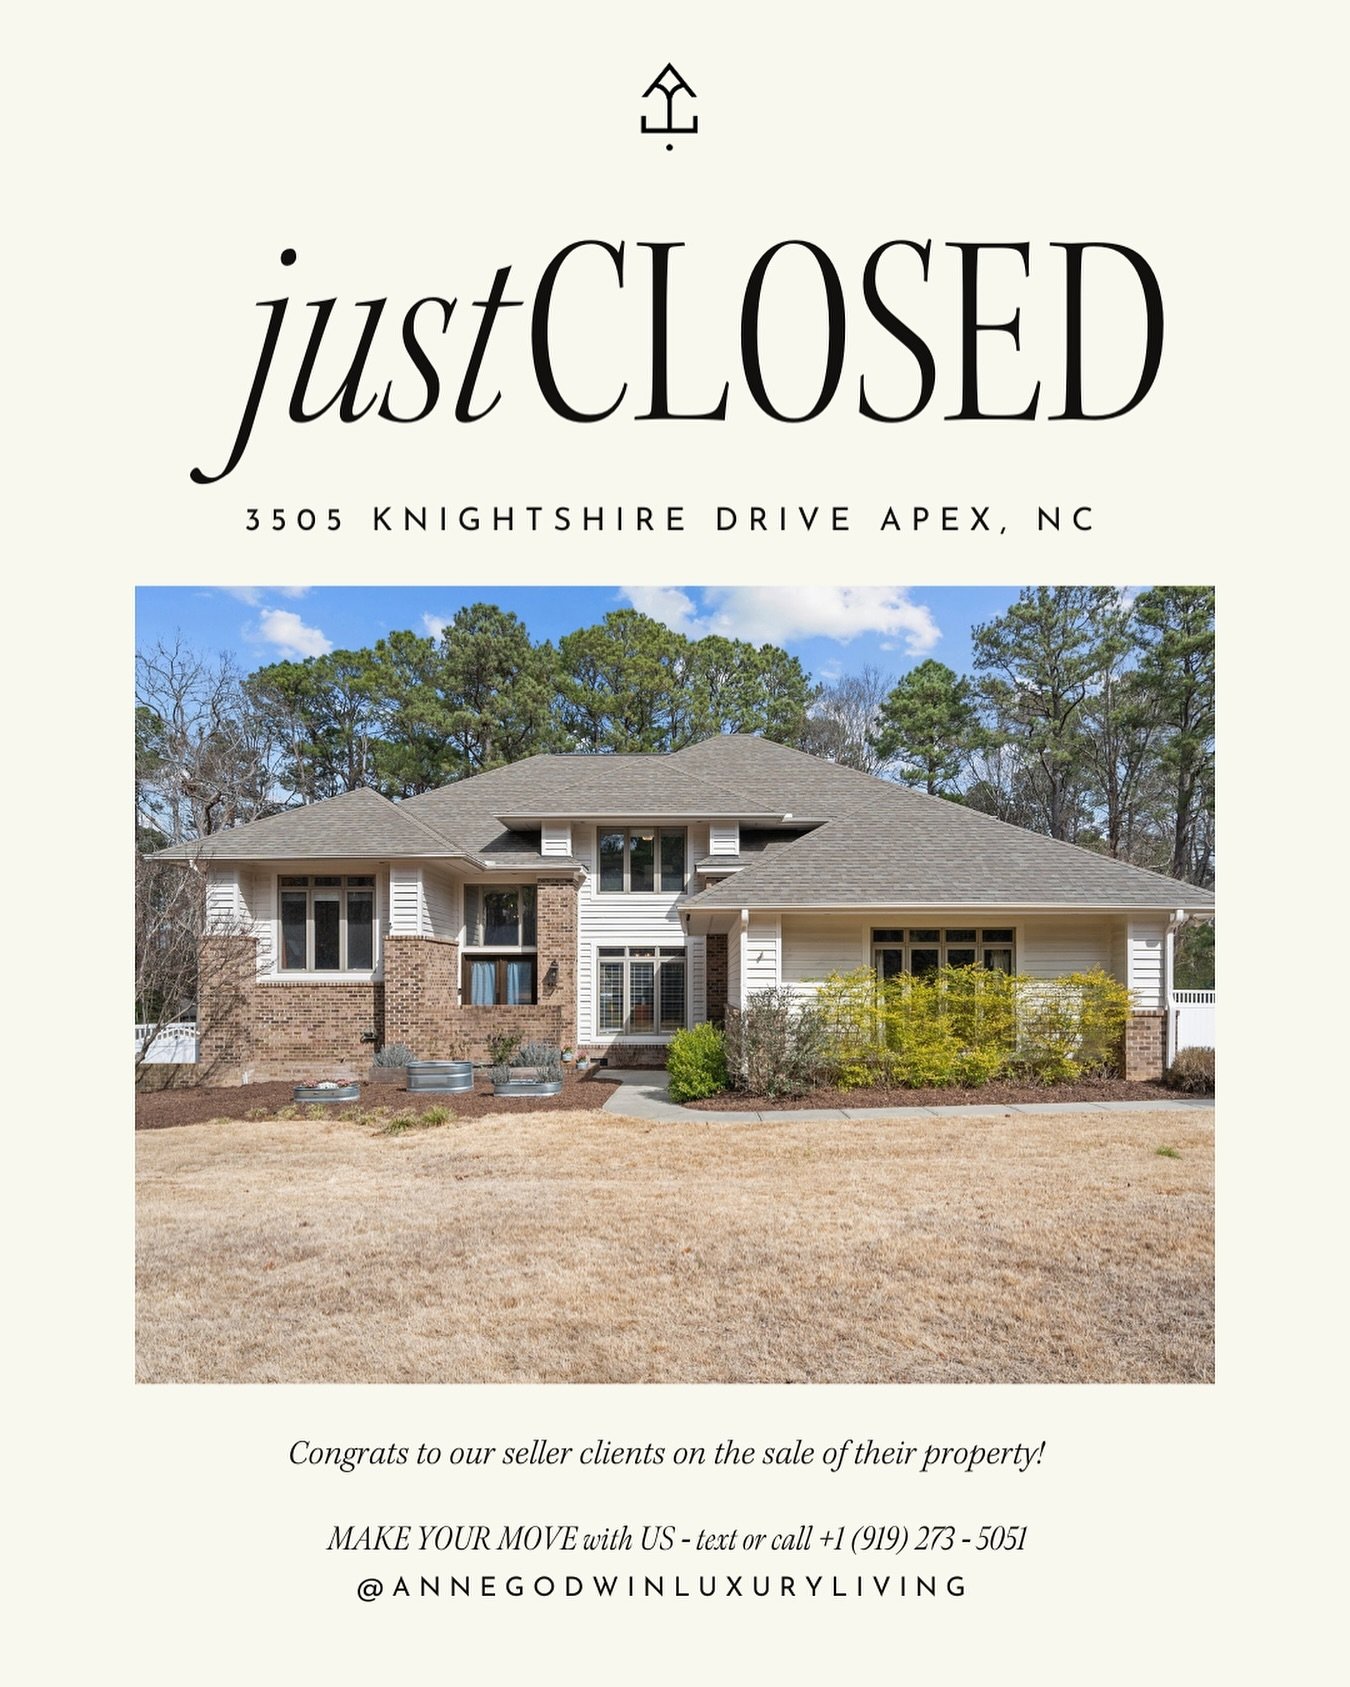 🏡 JUST CLOSED 🏡

Congrats to our seller clients on the closing of their beautiful Apex, NC home!  We were able to get their home under contract in just 3 days for over list.  With the right marketing &amp; pricing strategy you can see great success